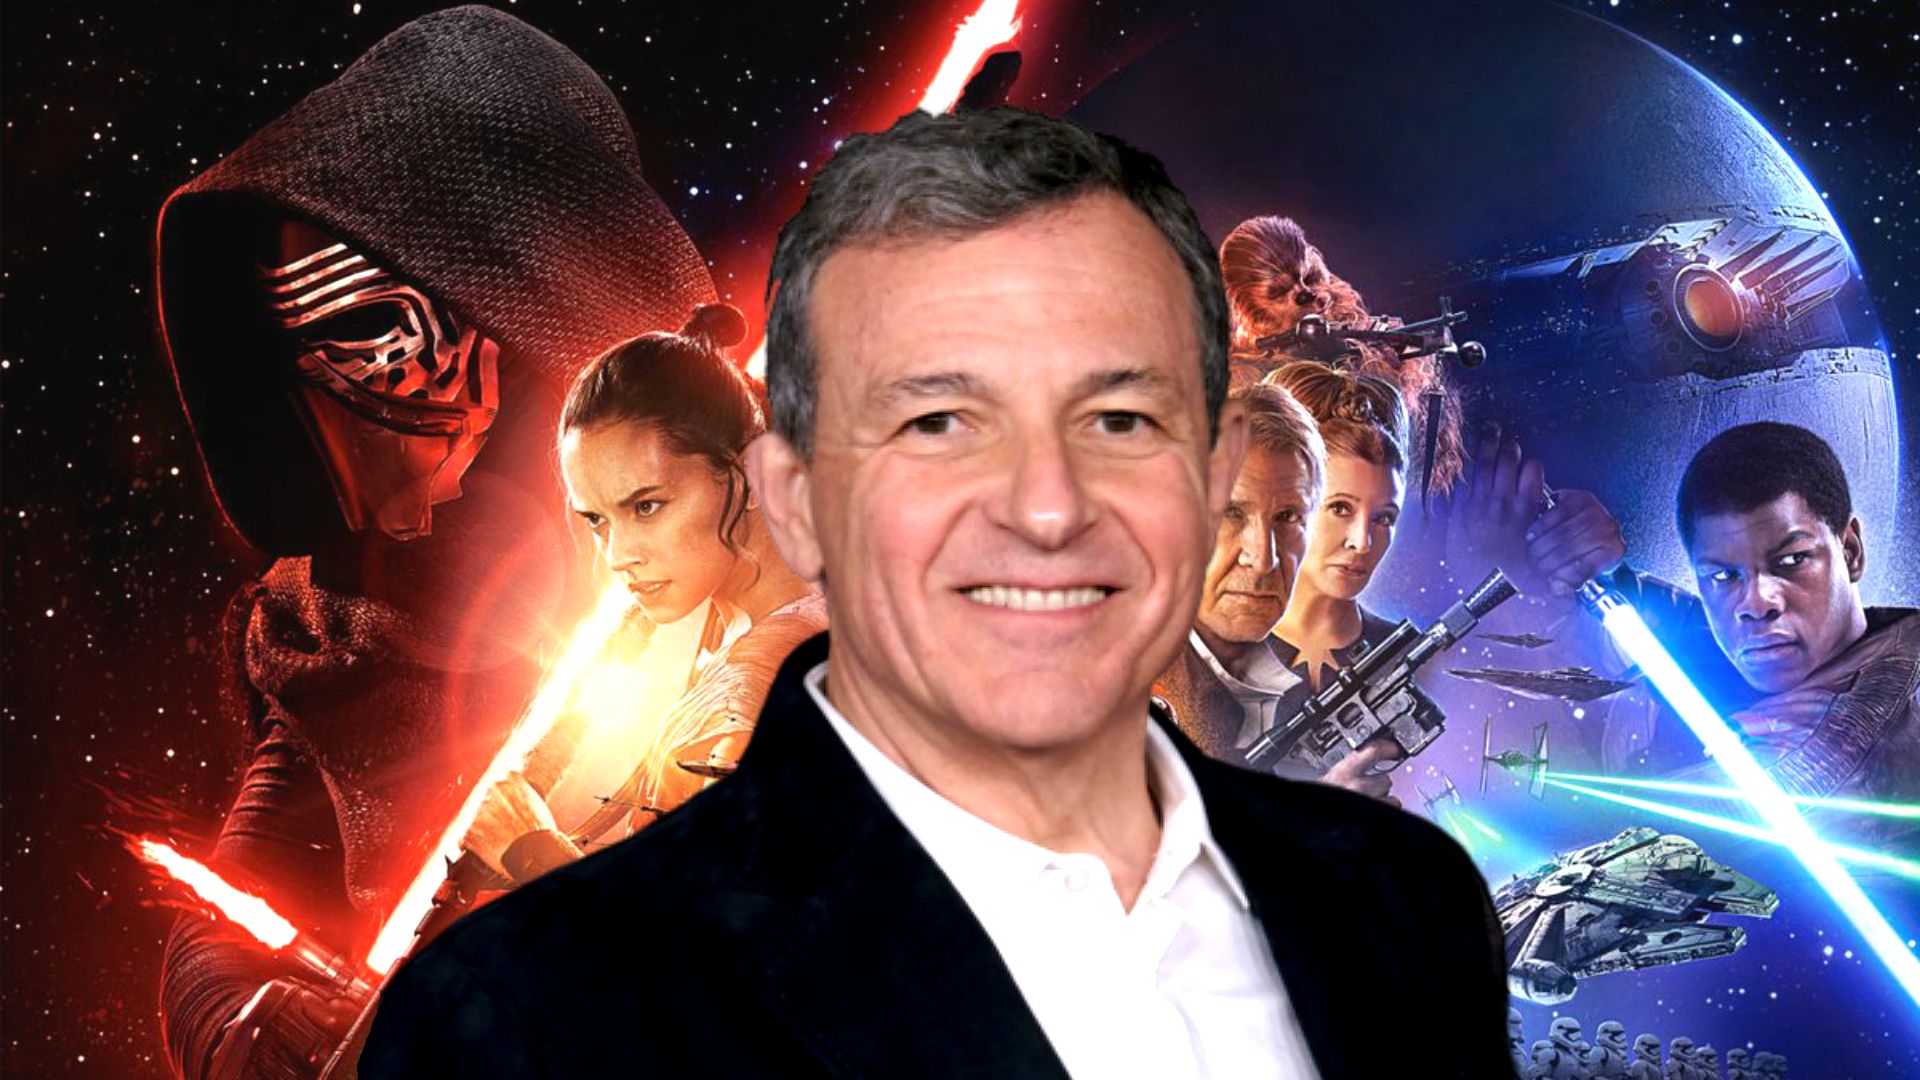 Disney’s Figures May Be A Fiction, But Star Wars Has Still Been Hugely Profitable